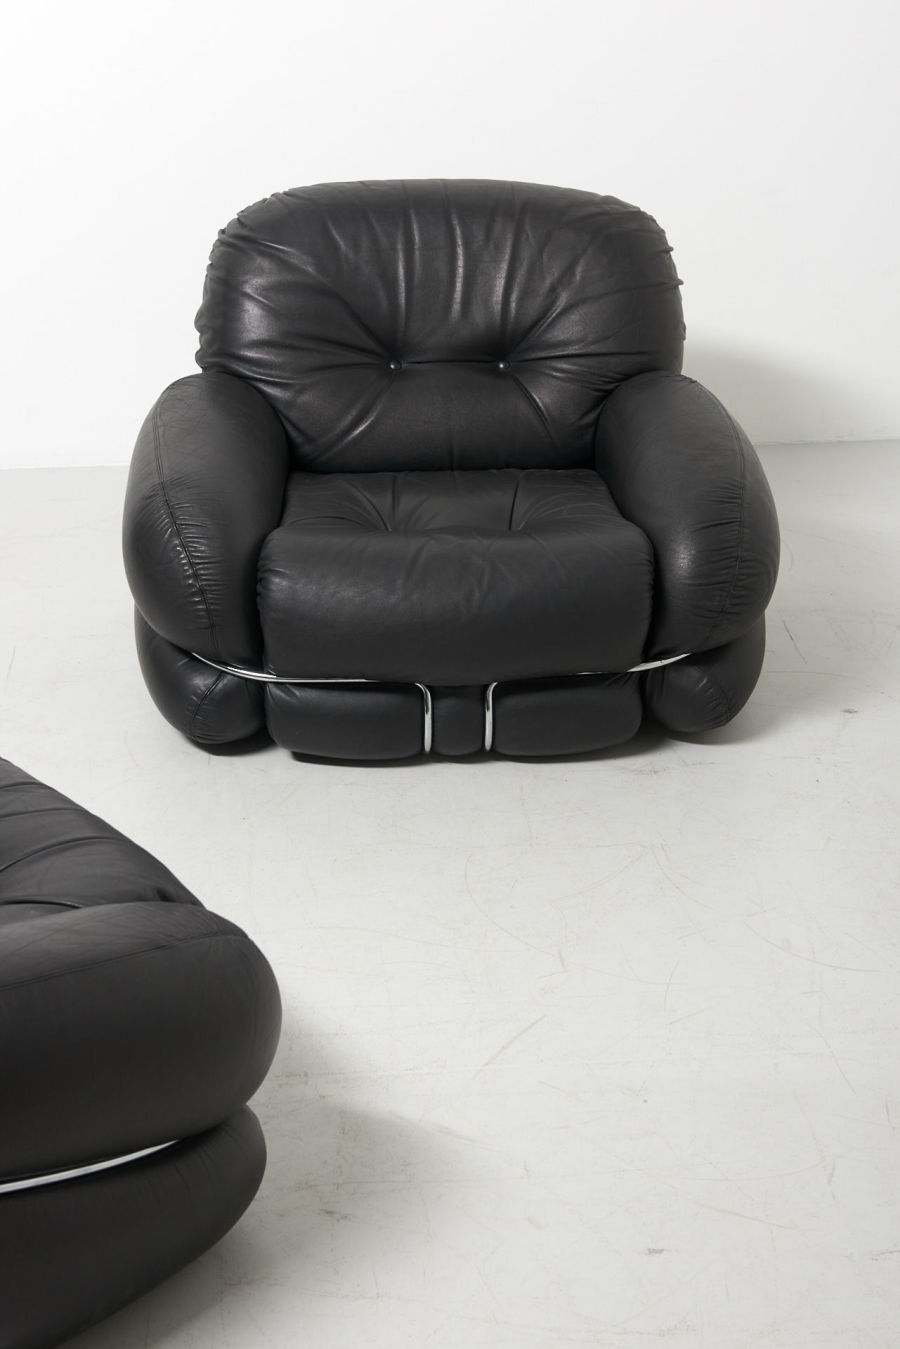 modestfurniture-vintage-2828-easy-chairs-black-leather-scarpa-style04